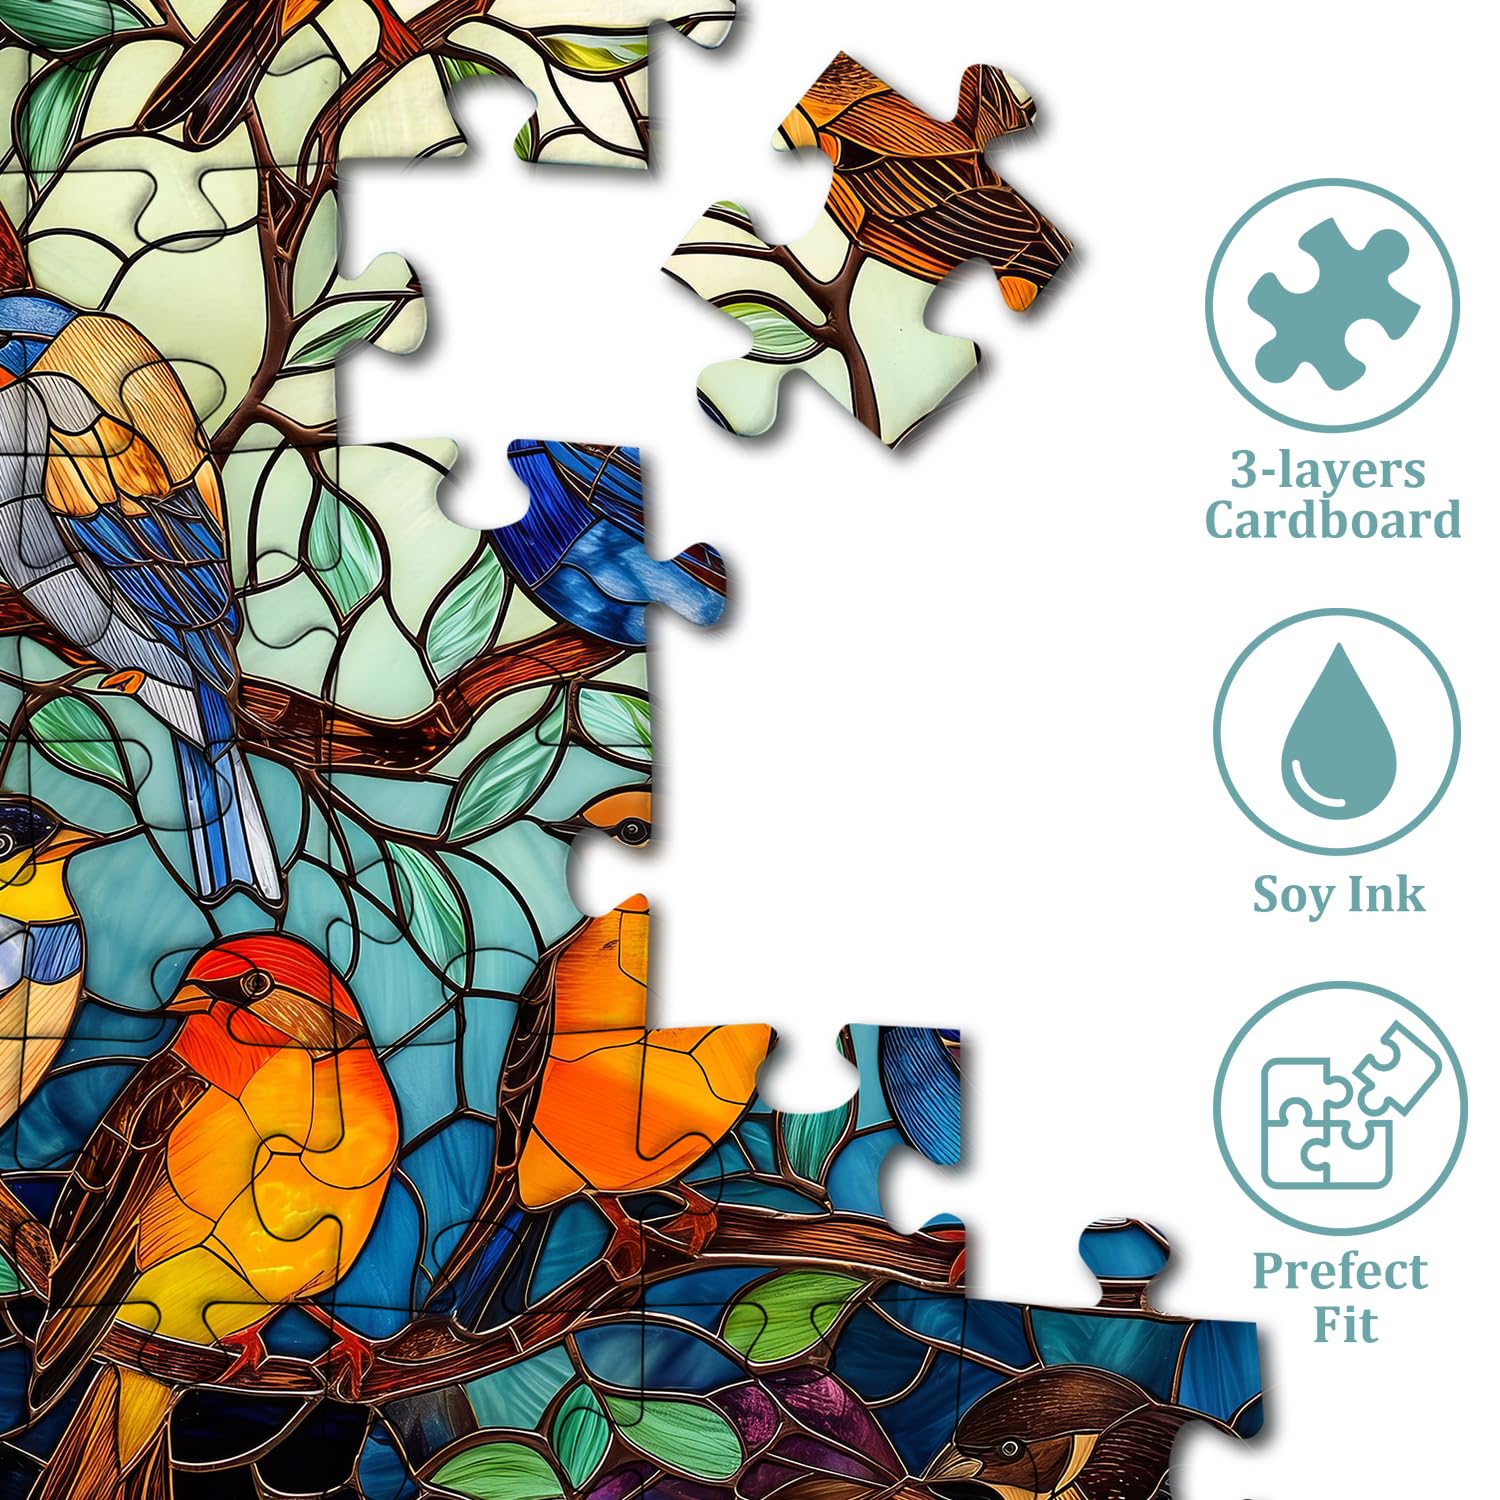 Stained Glass Bird Tree Jigsaw Puzzle 1000 Pieces